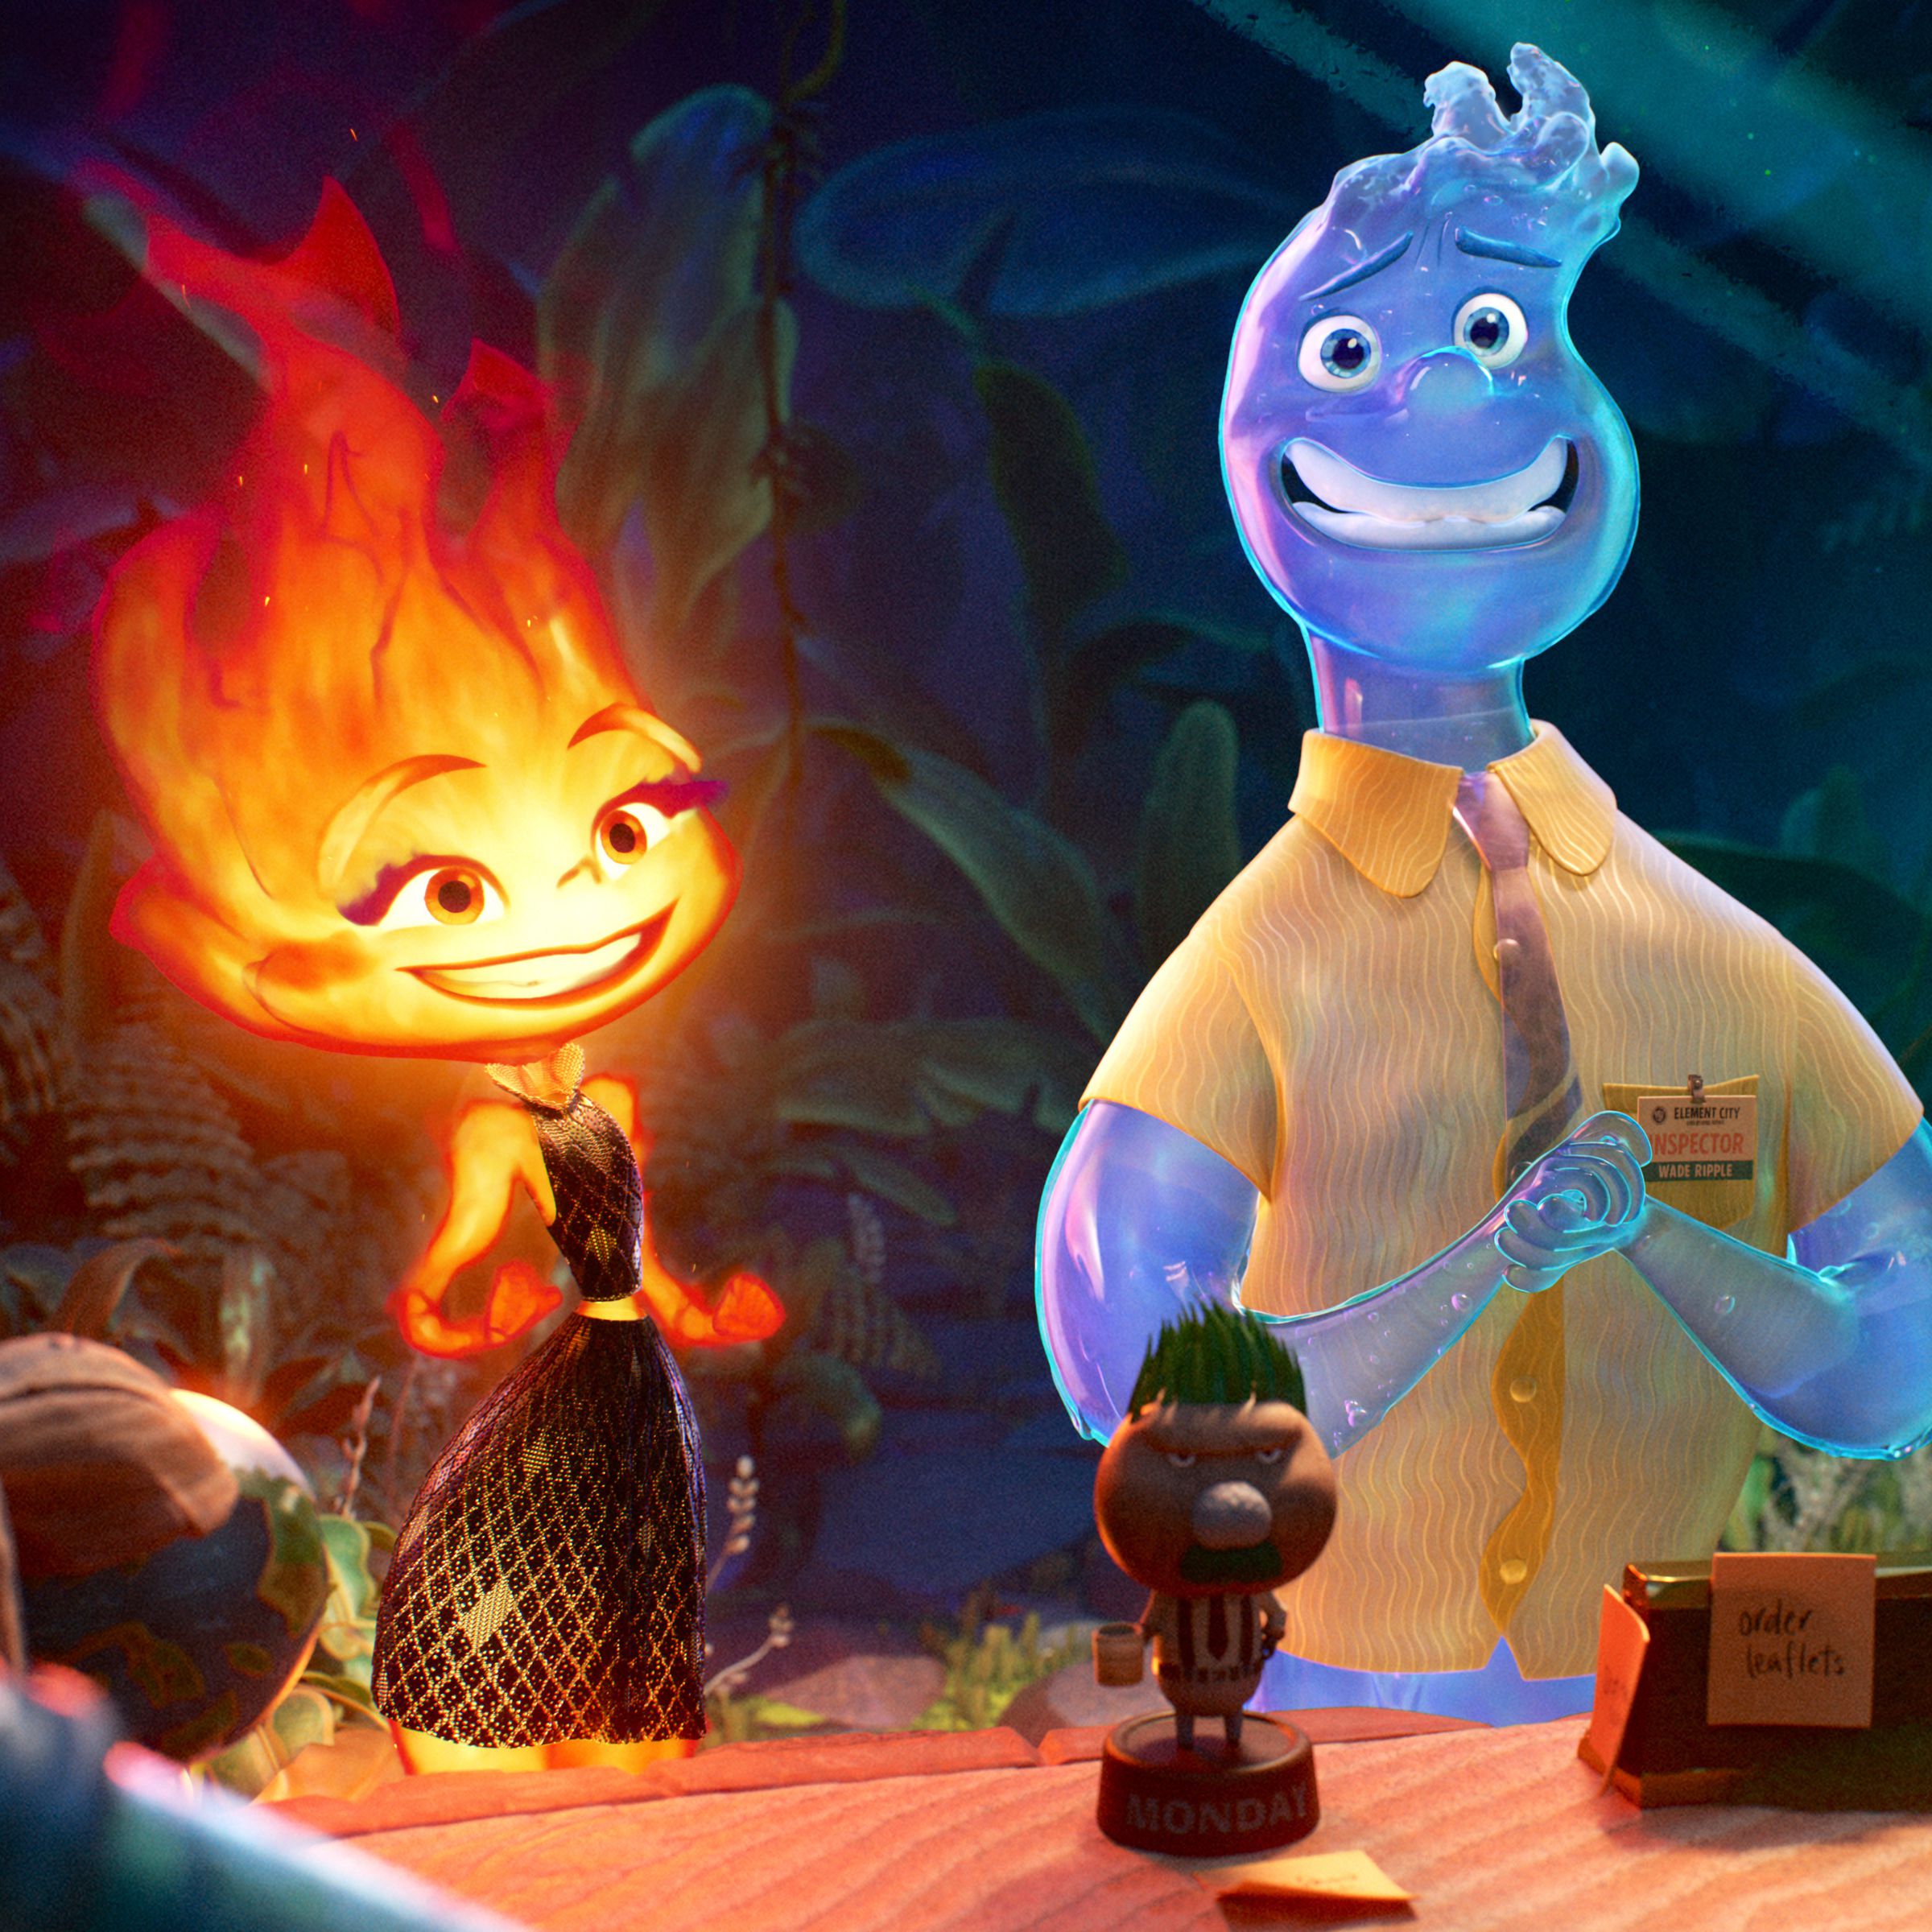 A humanoid wisp of flame in a metallic dress standing next to a humanoid made of water, dressed in a  button down shirt and tie. The pair are standing nervously in front of a desk.